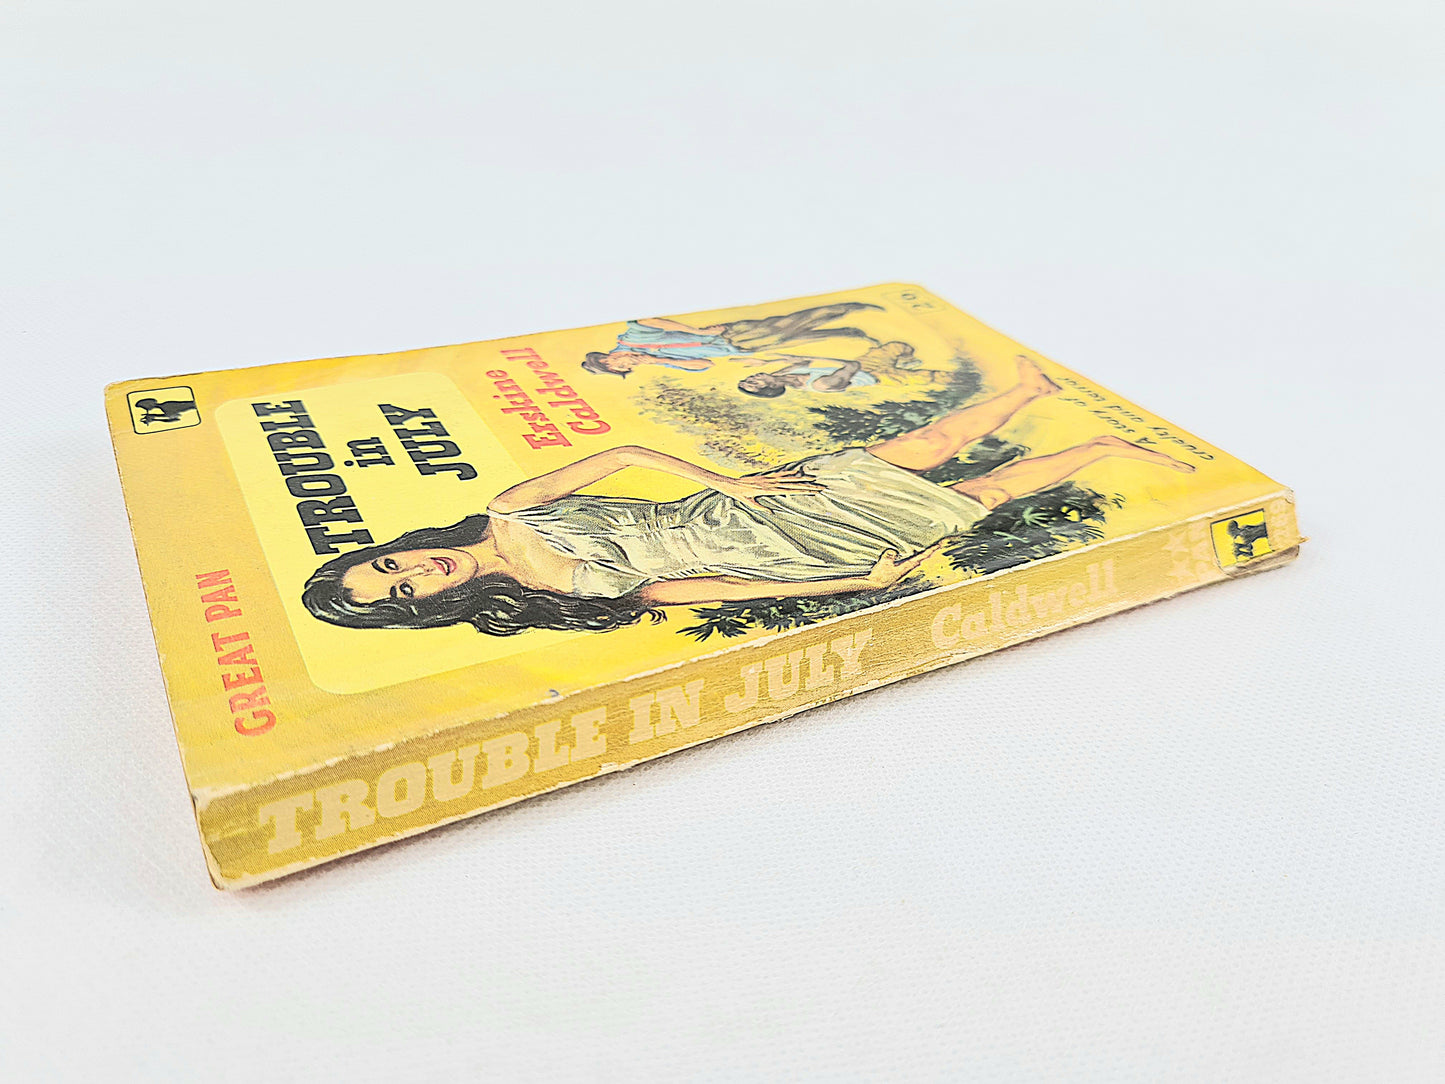 Trouble in July by Erskine Caldwell. Vintage Pan Books G269